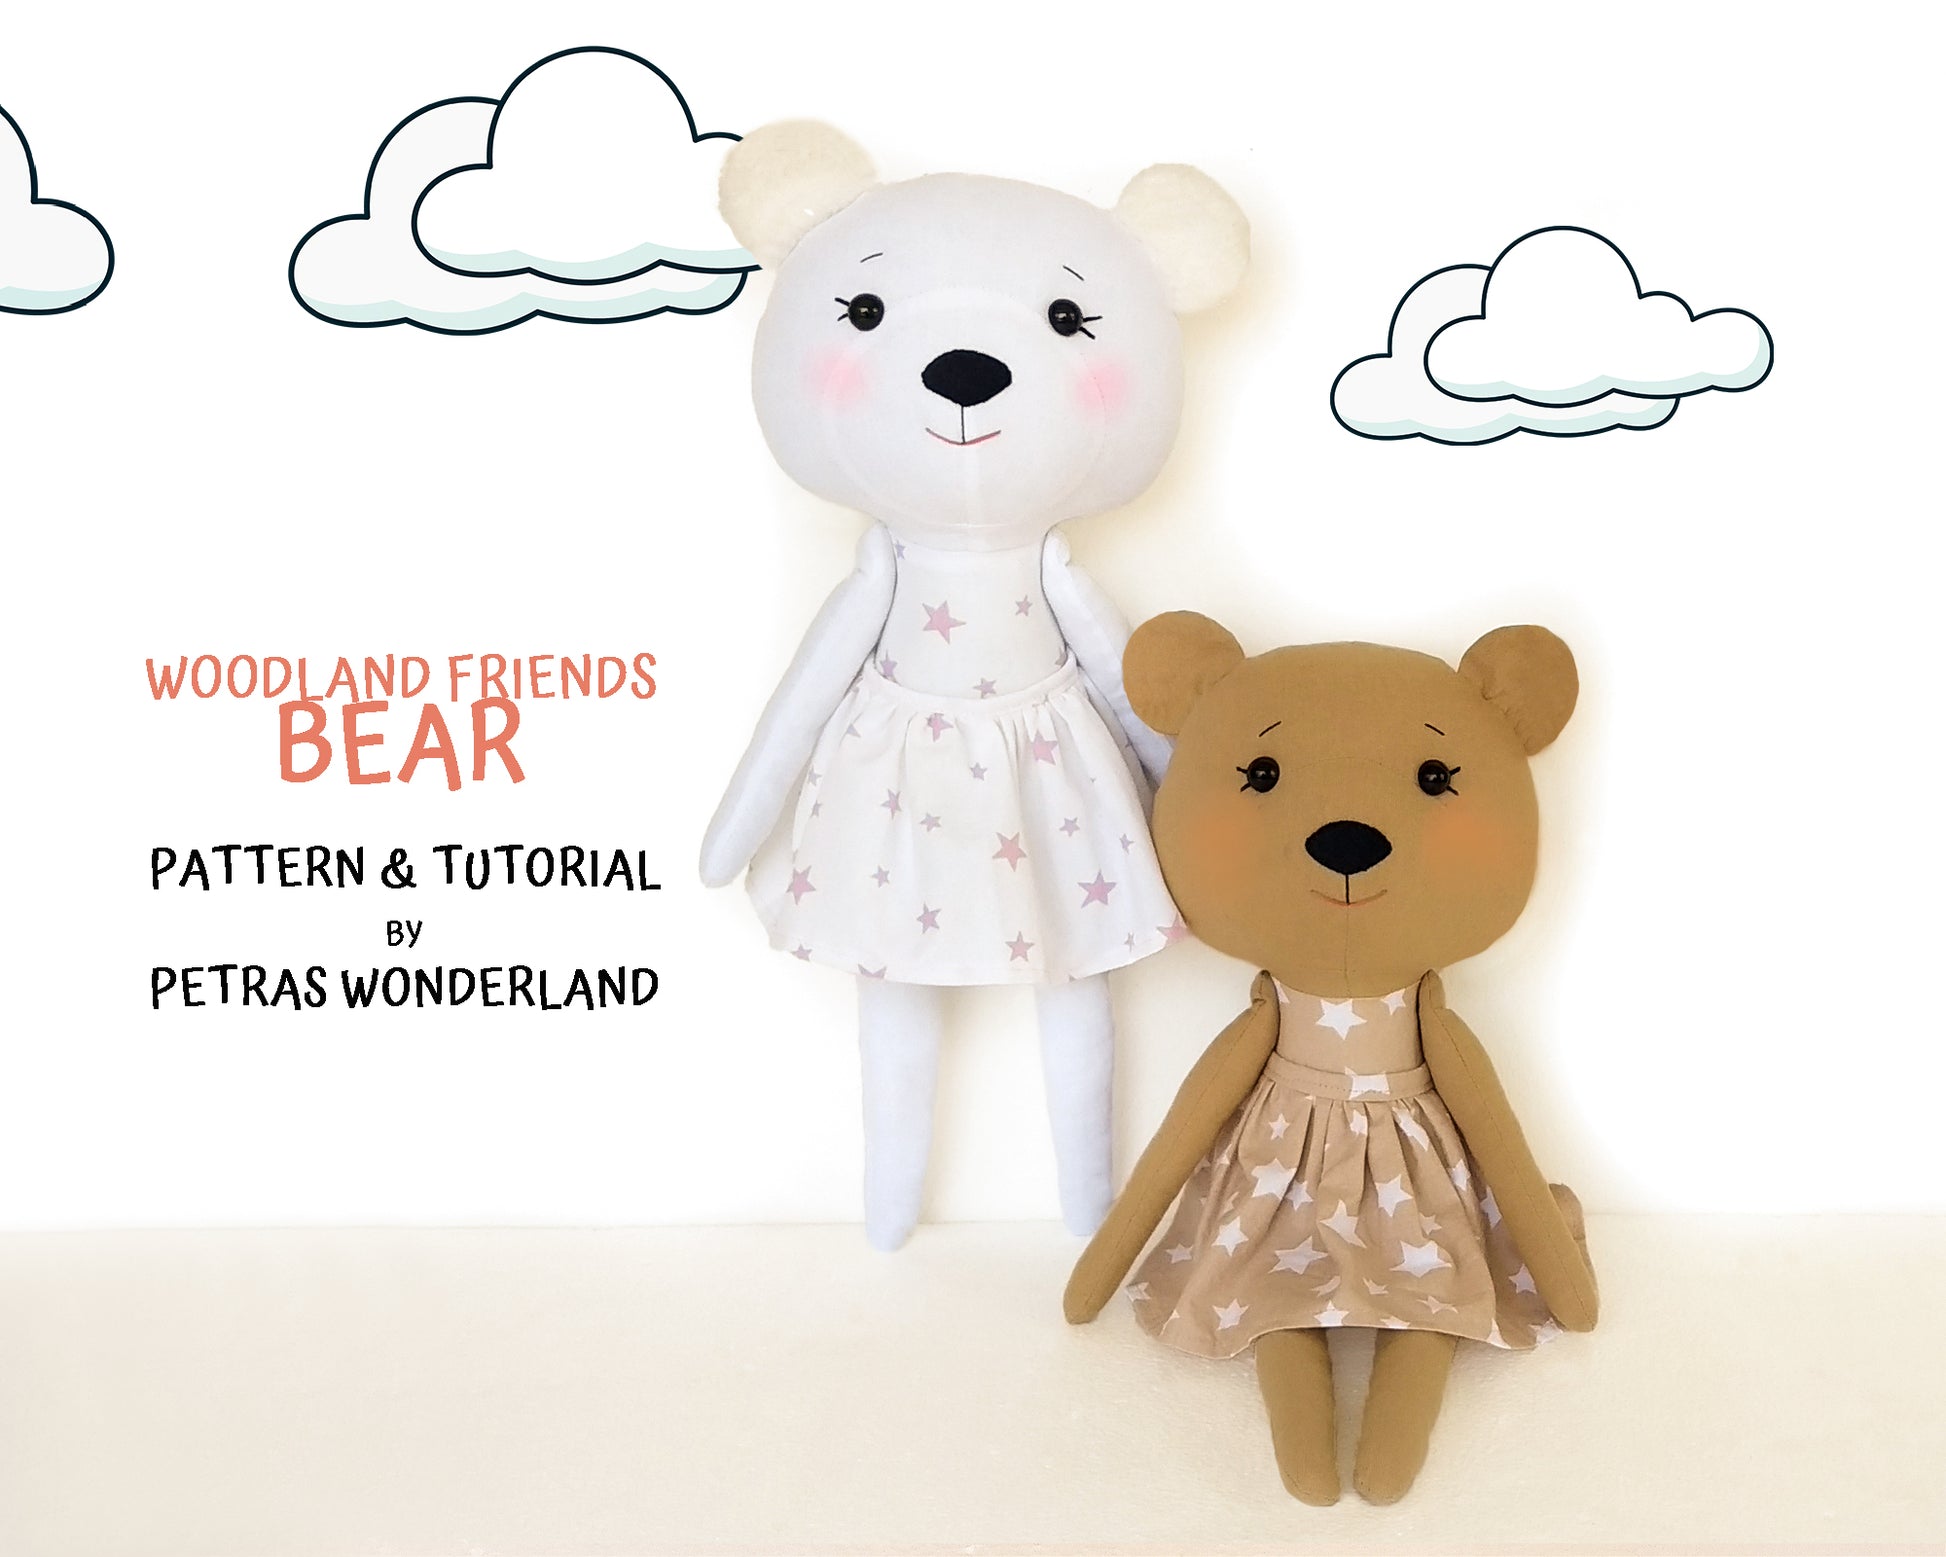 Woodland Friends Bear - PDF doll sewing pattern and tutorial